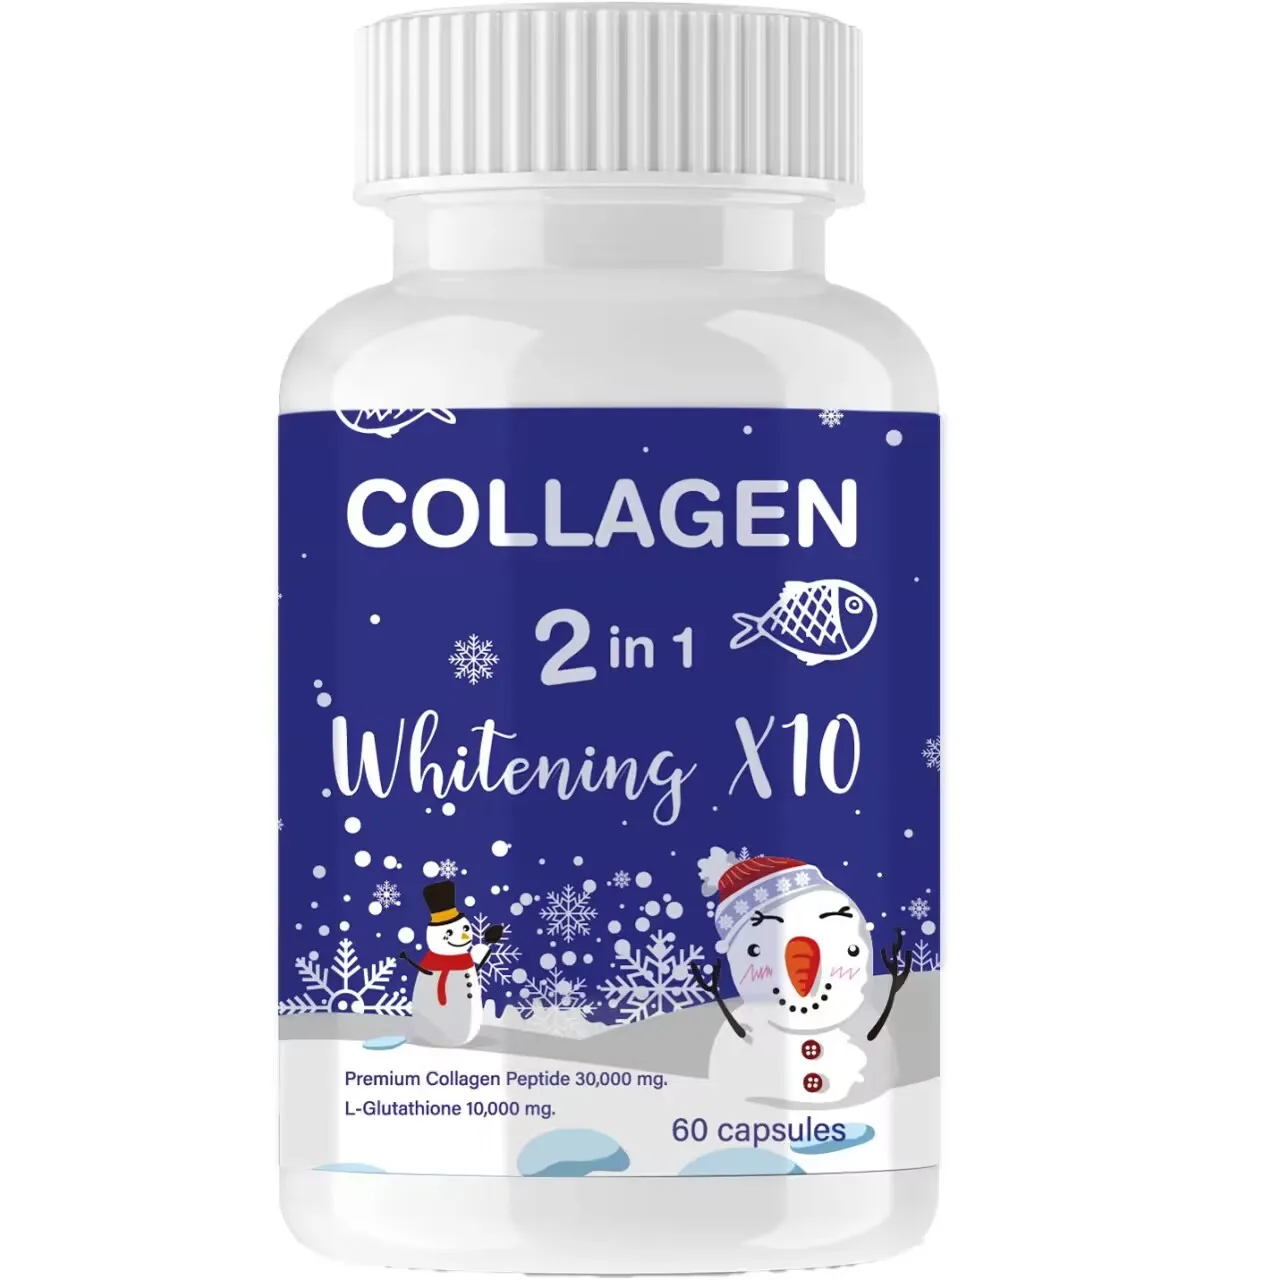 

60 pills collagen capsules supplement nutrition beautify beautify the skin improve resistance reduce wrinkles health food